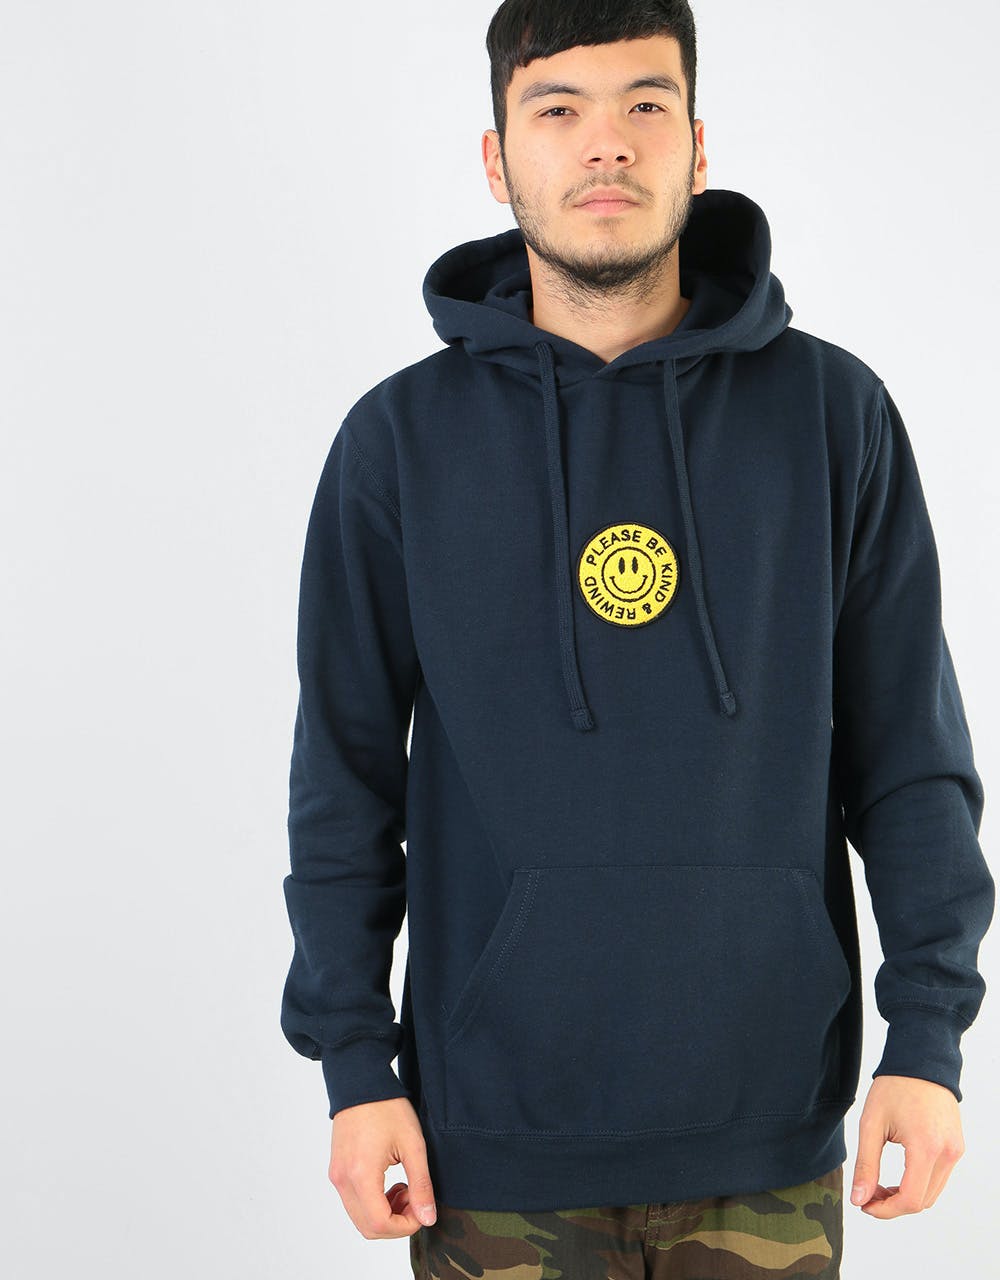 The National Skateboard Co Rewind Pullover Hoodie - Navy